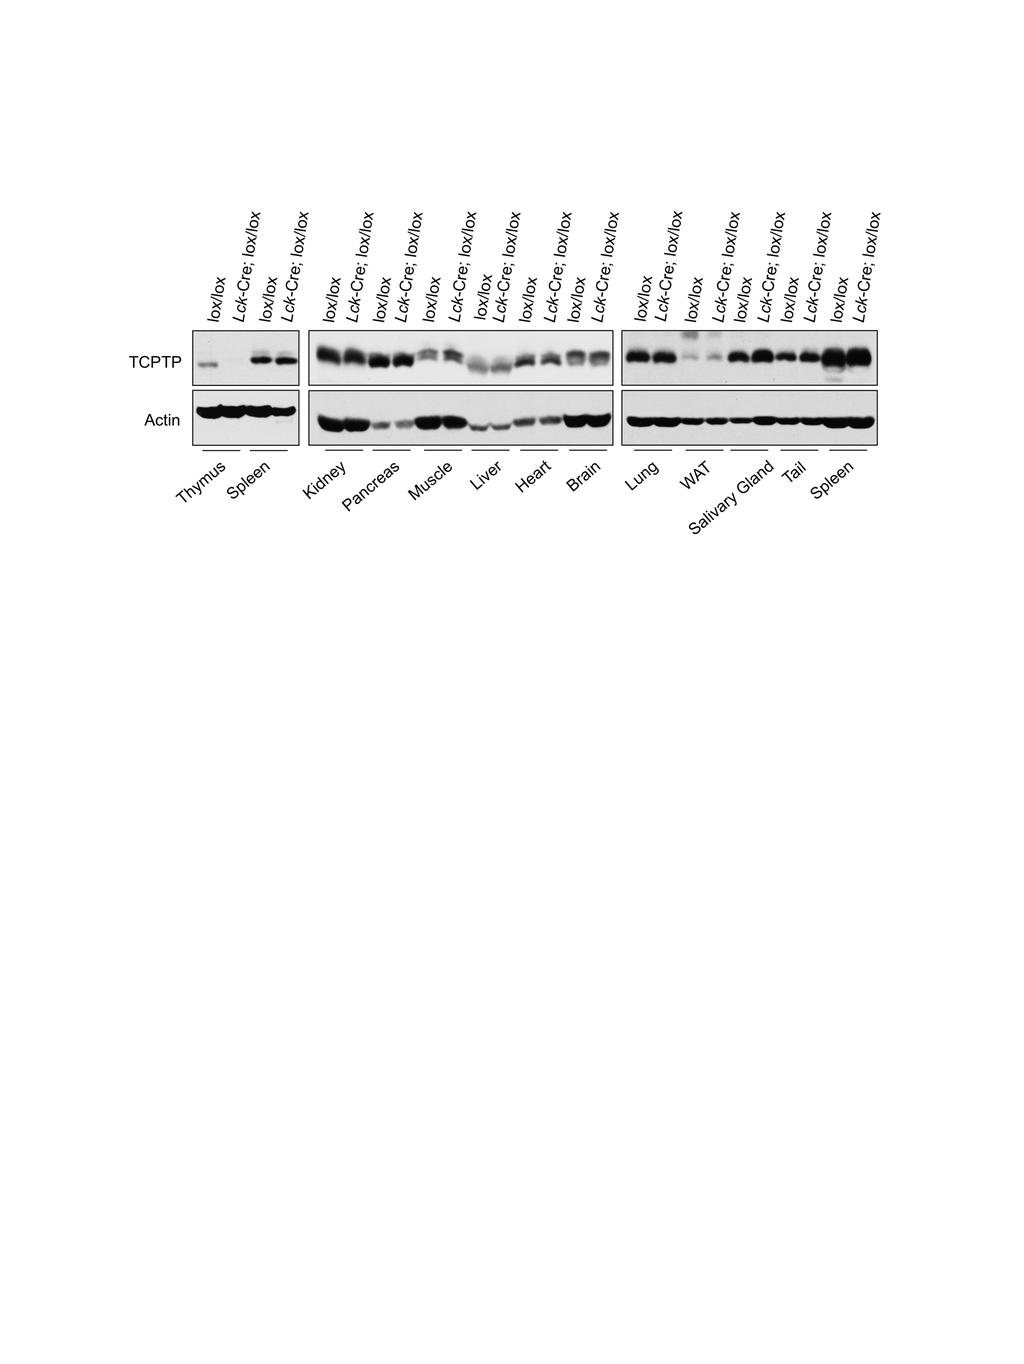 Supplementary Figure 1. TCPTP expression in Lck-Cre;Ptpn2 lox/lox mice.